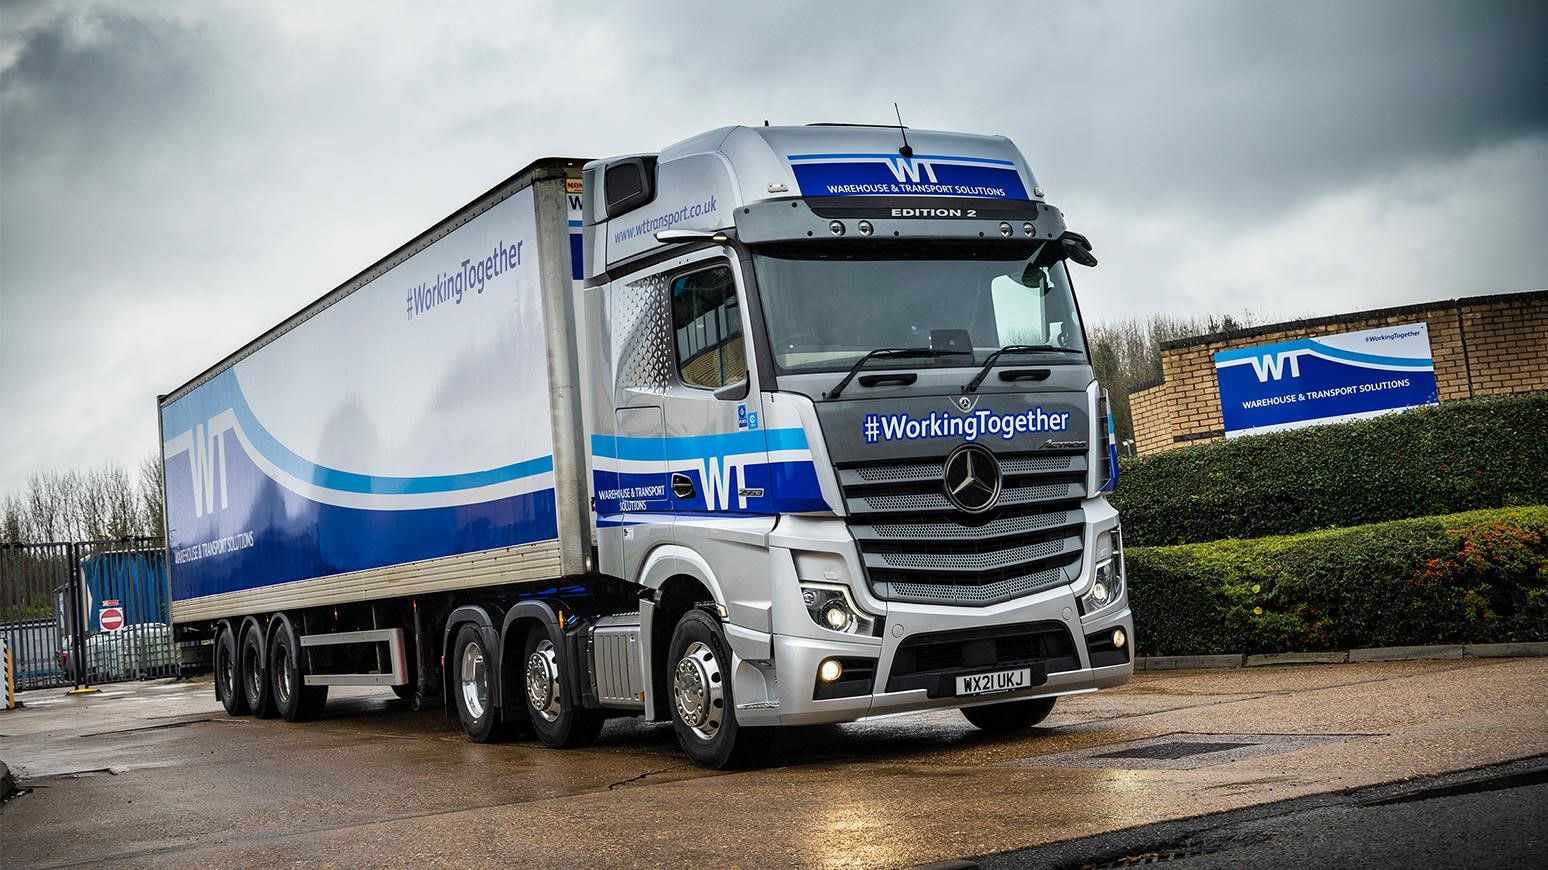 Mercedes-Benz Actros Edition 2 Rounds Out Trio Of Limited-Edition Actros Tractors For WT Warehouse & Transport Solutions